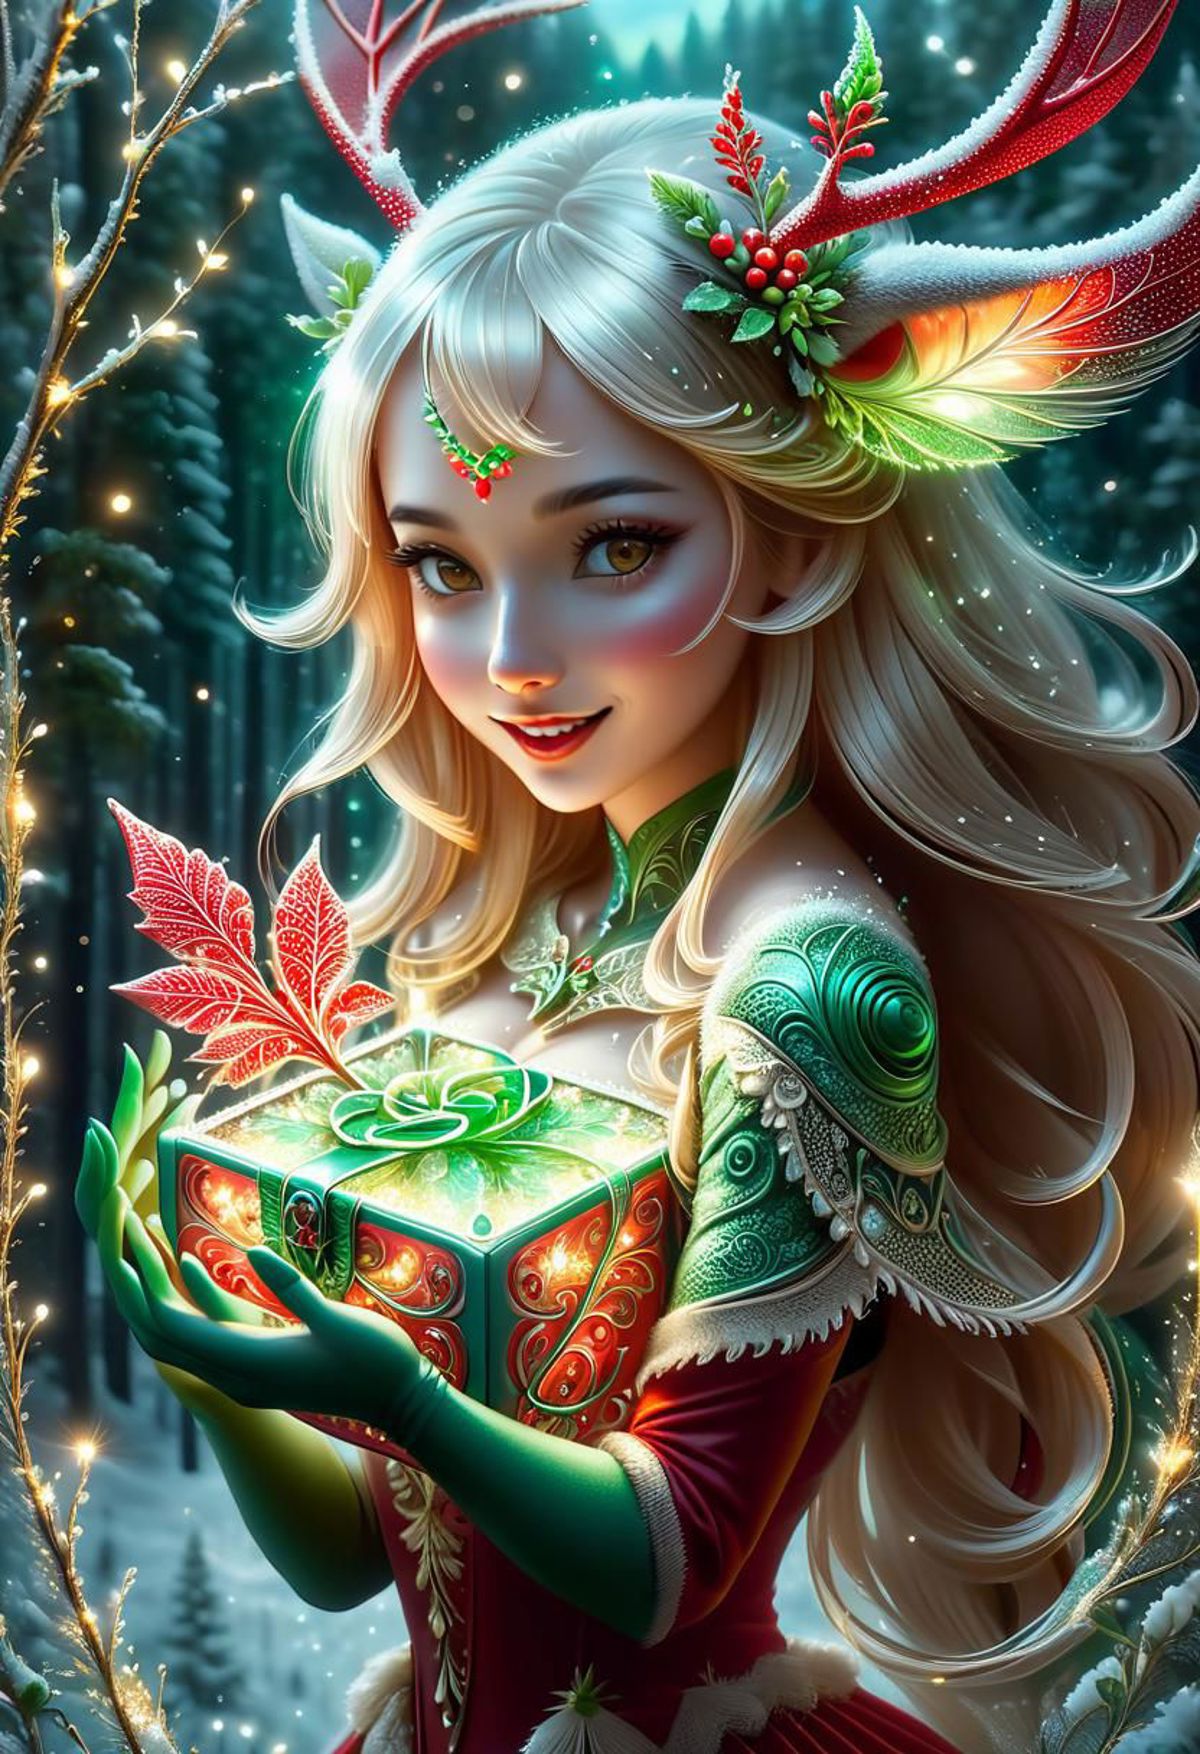 A pretty elf girl with blonde hair holding a gift box with a green leaf on the top.